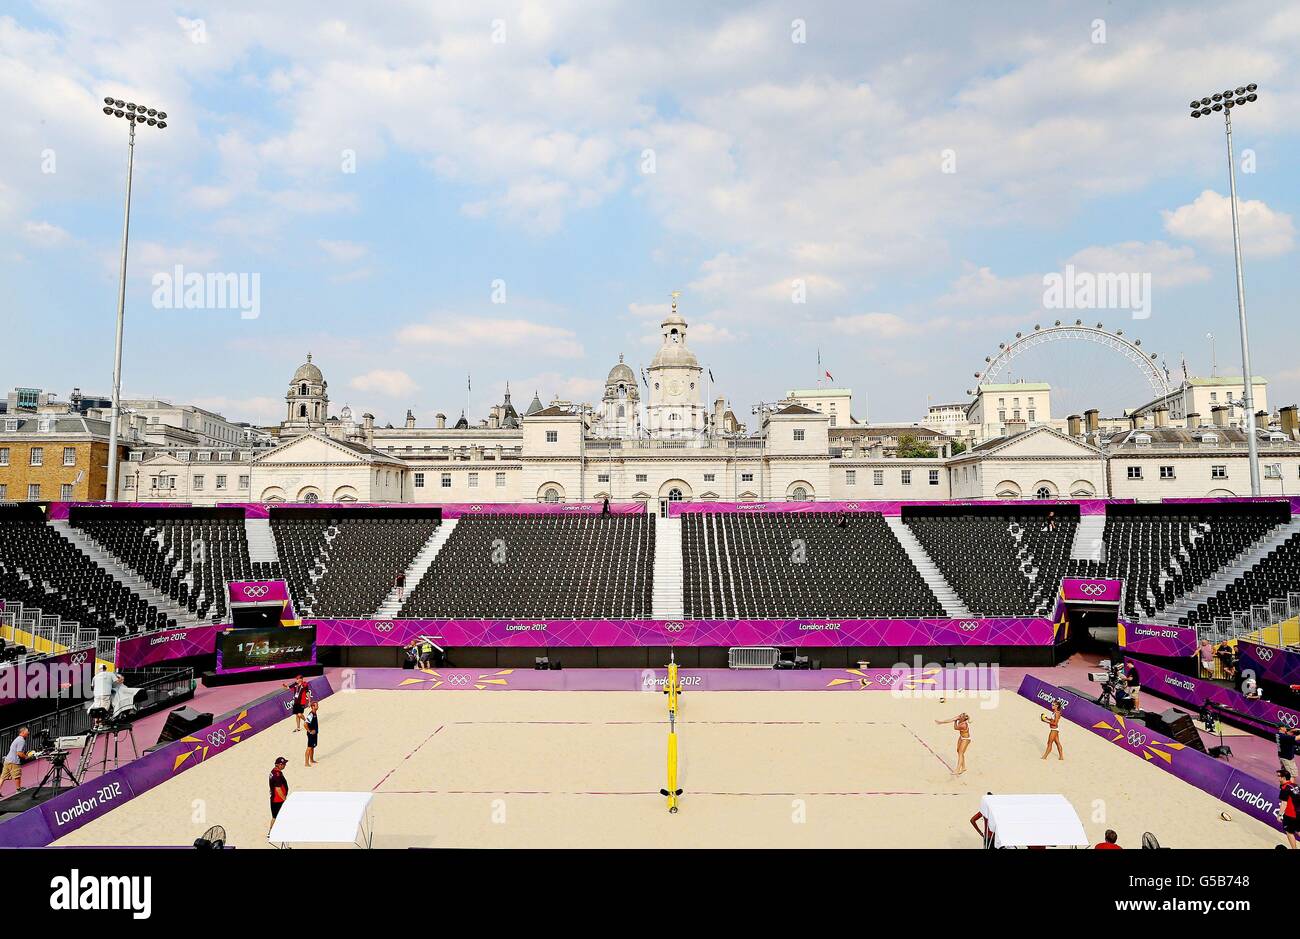 Shauna Mullin (2nd right) and Zara Dampney (right) from Great Britain's Women's Volleyball team during a training session on Centre Court at the Beach Volleyball arena at Horse Guards Parade in central London. Stock Photo